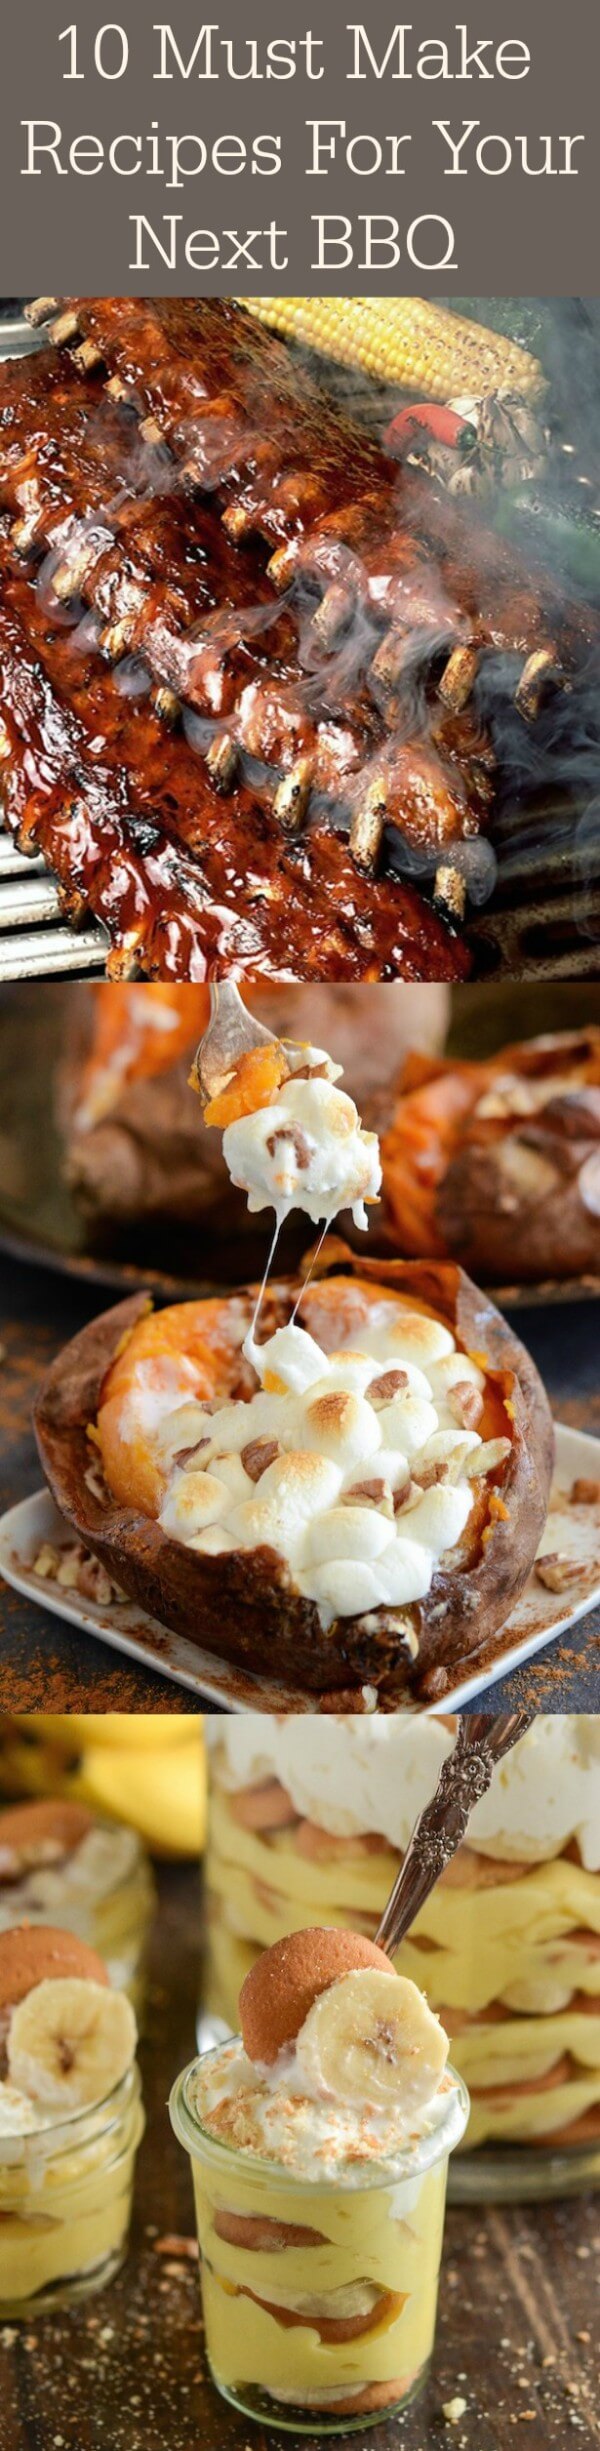 Photo collage of 10 Must Make Recipes For Your Next BBQ